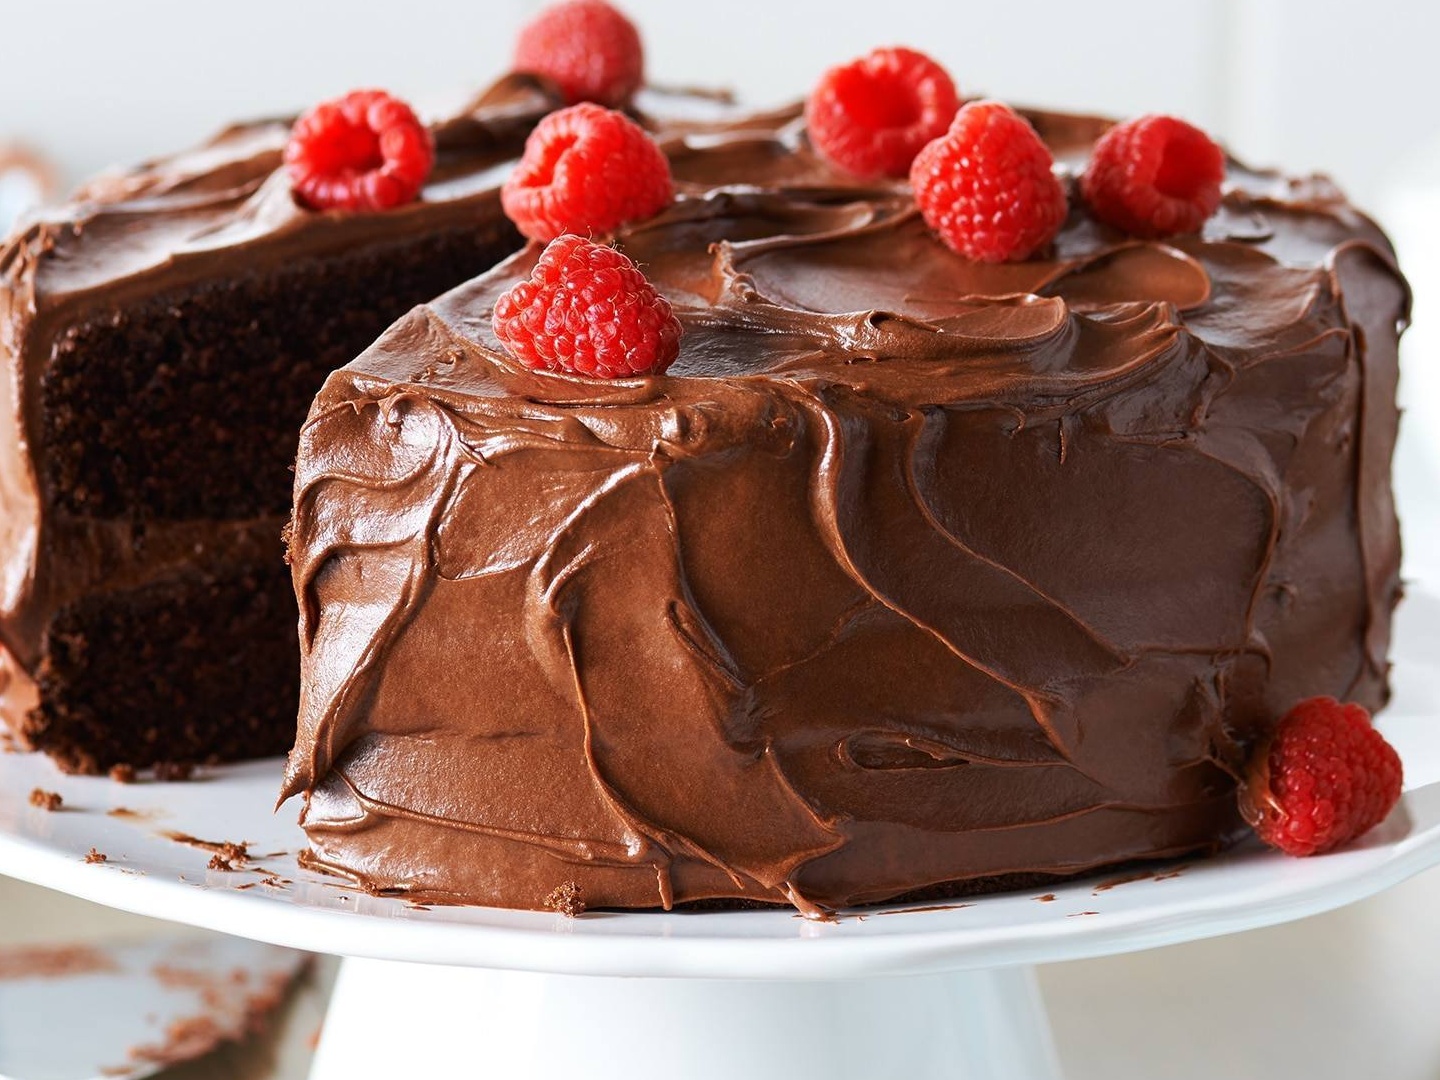 This chocolate cake is made with… tomato soup